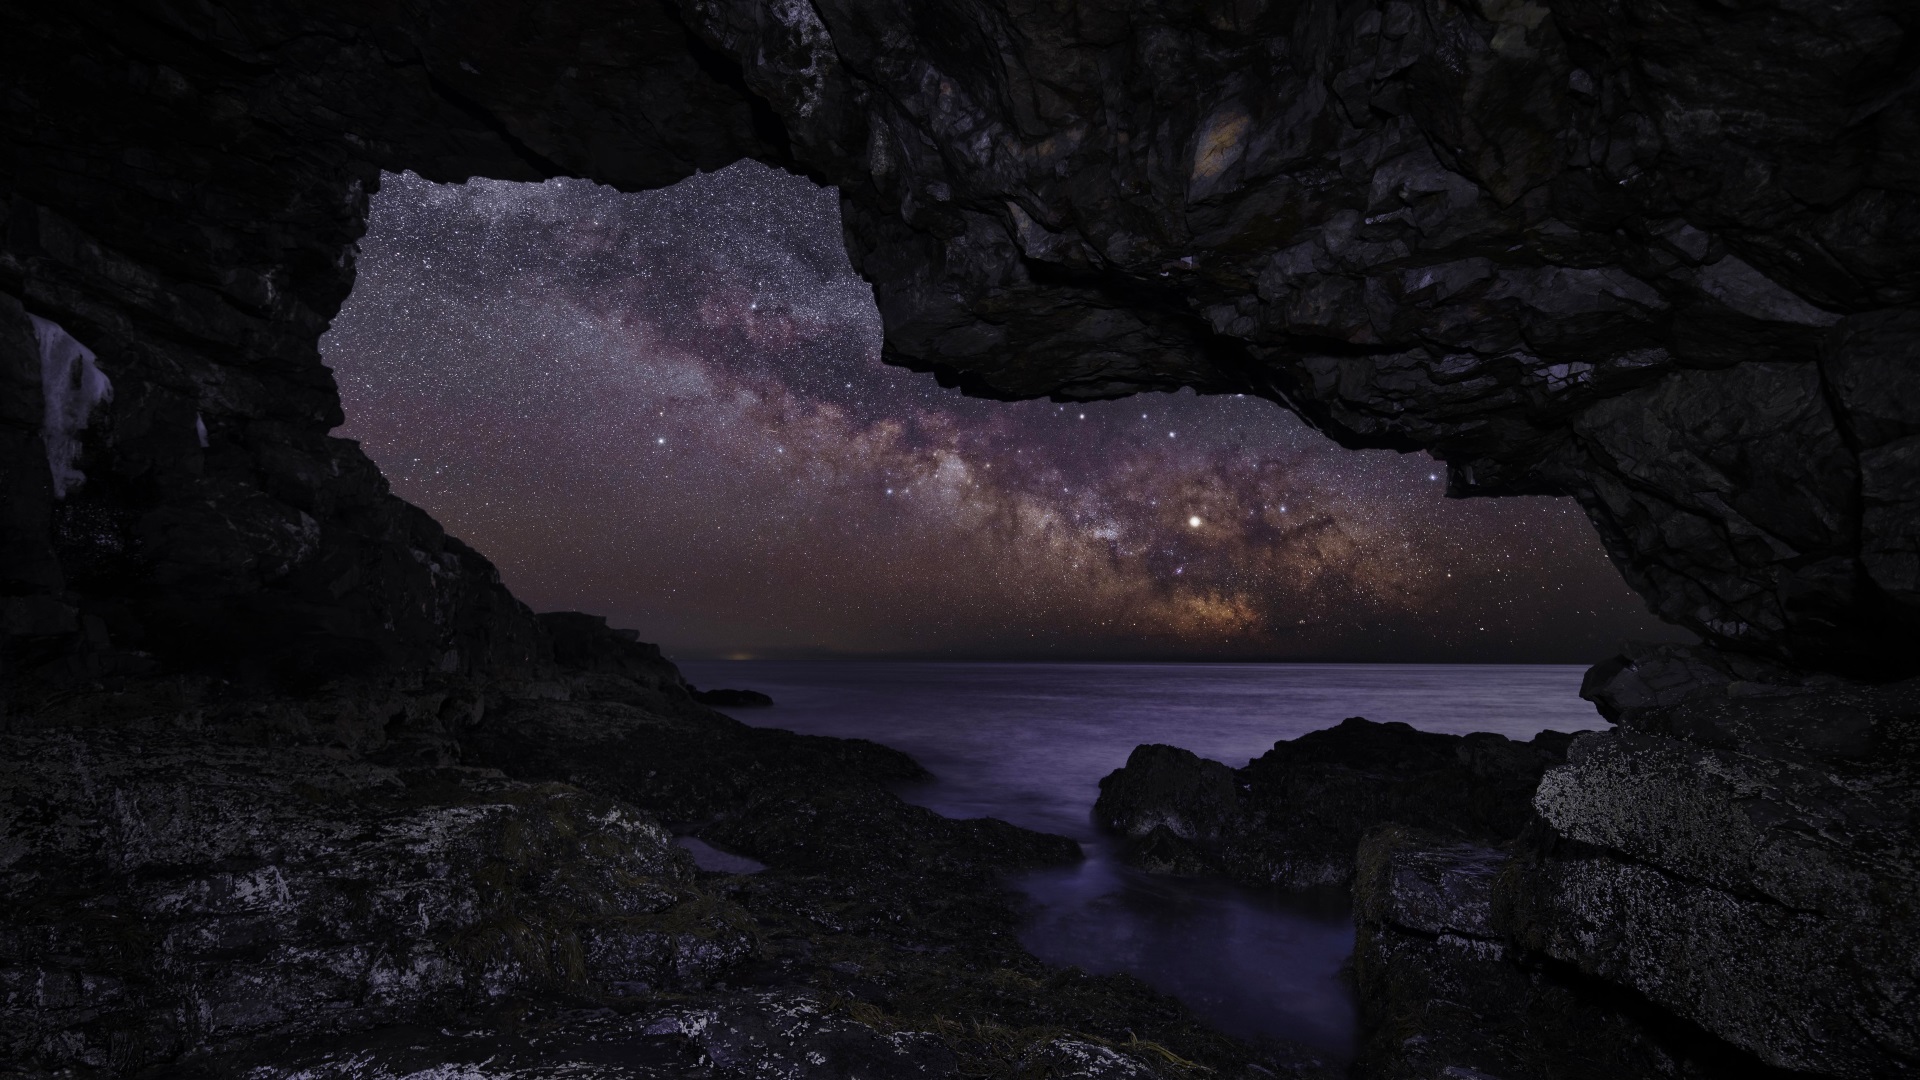 Milky Way Over Otter Cliffs Wallpapers